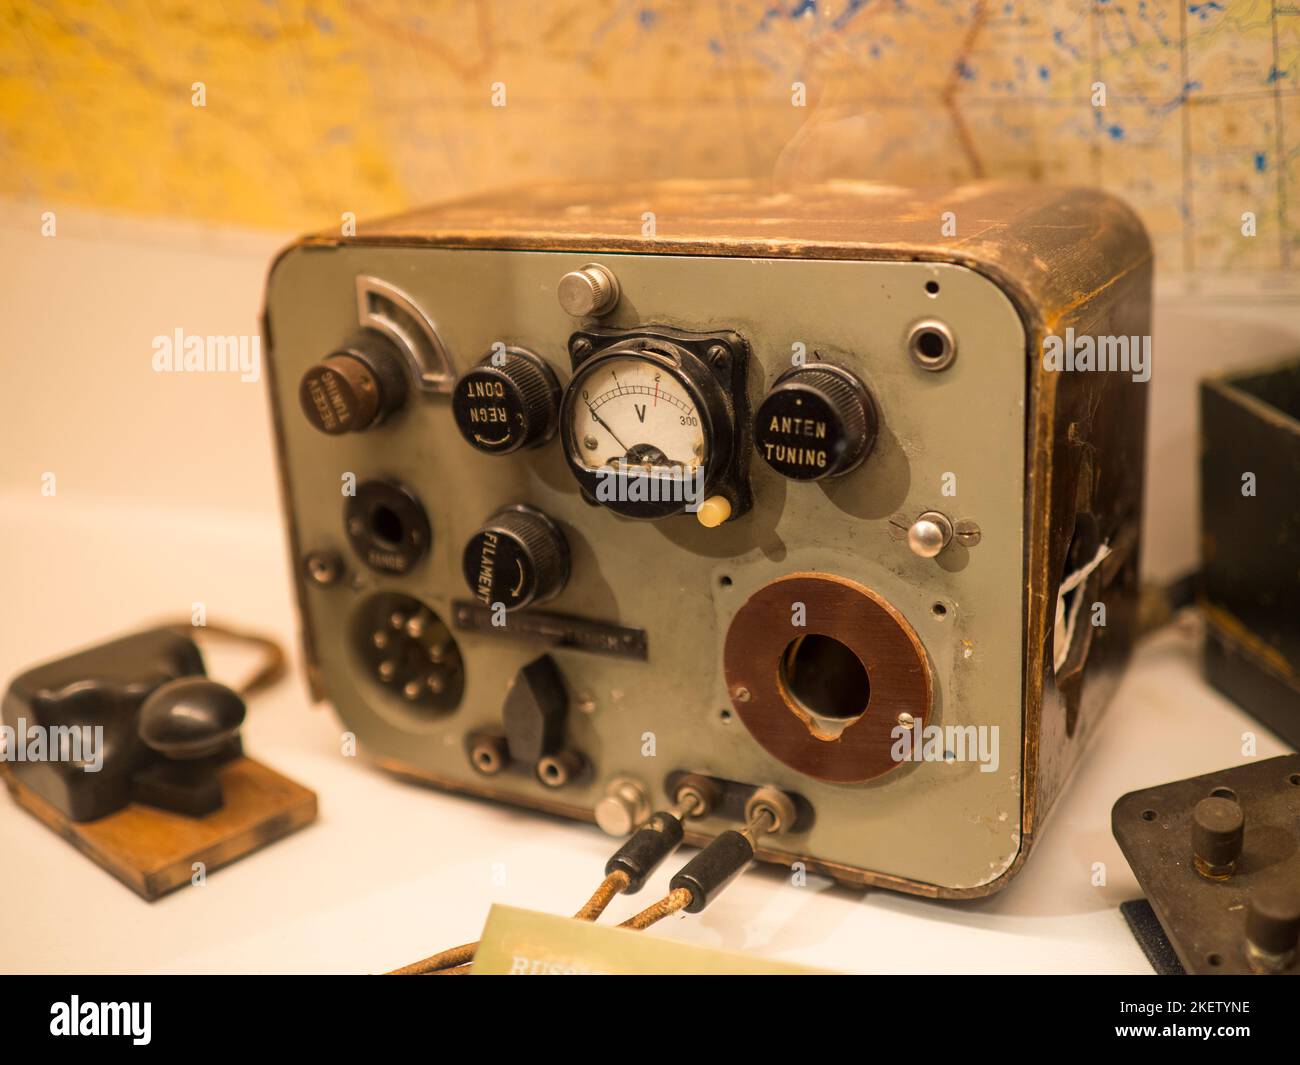 Secret Radio, Used for Communication with British and Norway Resistance, Norway Resistance Museum, Oslo, Norway, Scandinavia, Europe. Stock Photo